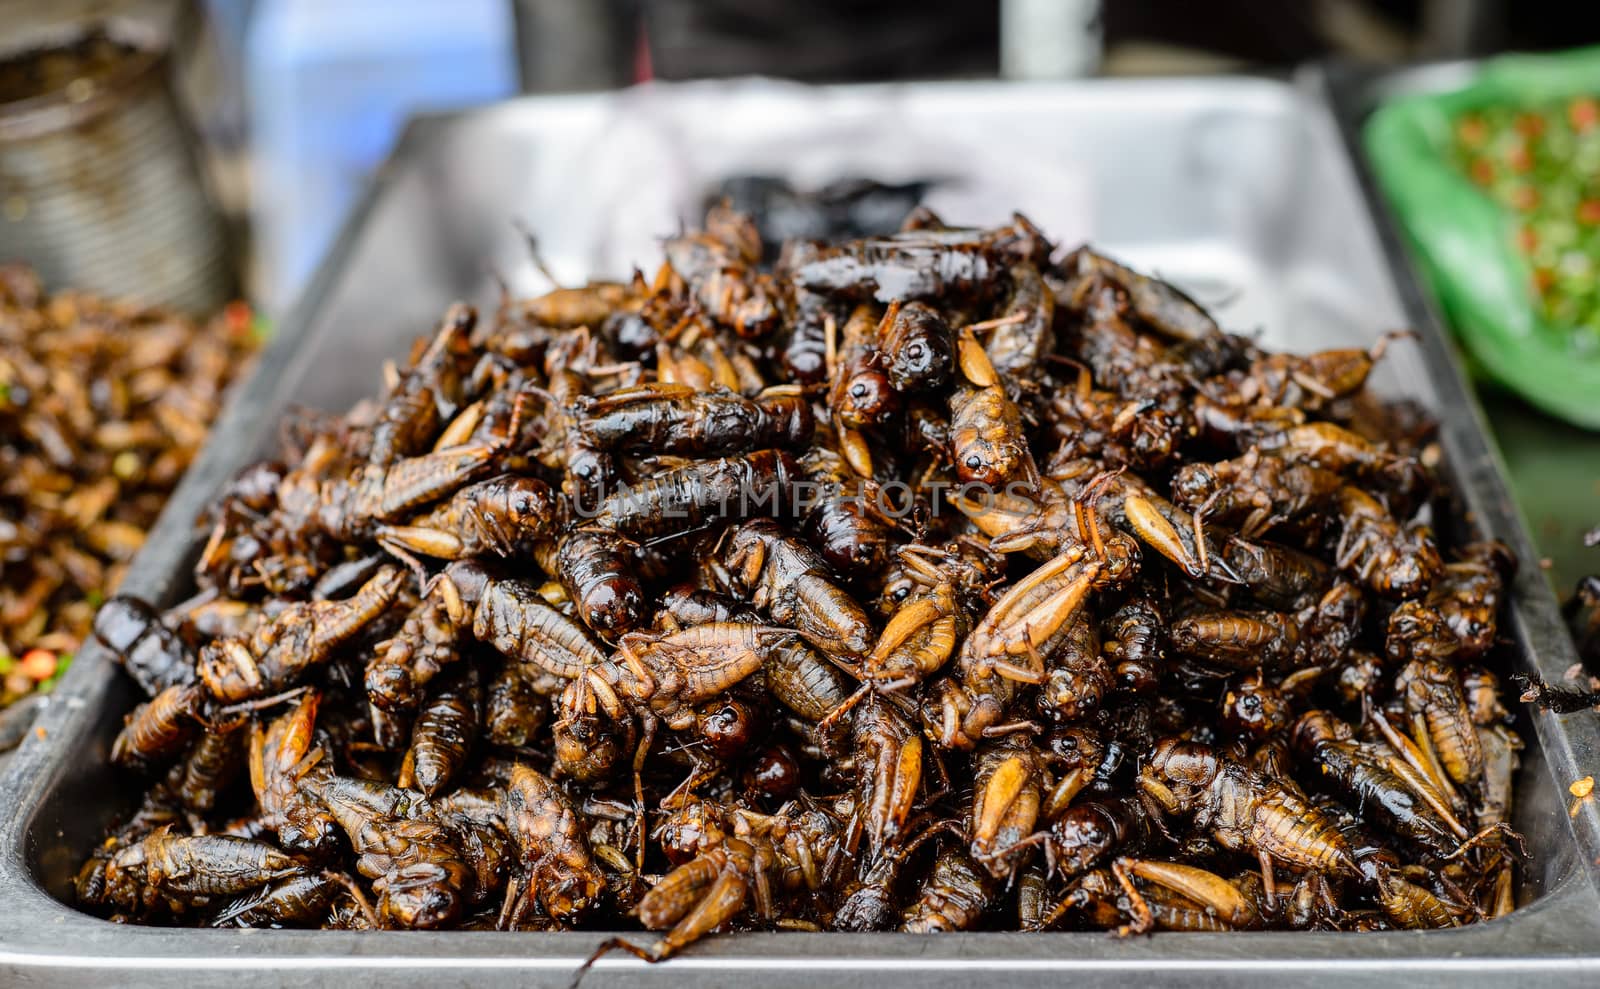 Fried edible insects on tray have been sold at Kampong Thom market, Cambodia, September 1st 2014. Fried crickets is a kind of insects food & is favorite dish of Khmer







Fried edible insects on tray have been sold at Kampong Thom market, Cambodia, September 1st 2014. Fried crickets is a kind of insects food &amp;amp; is favorite dish of Khmer







Kampong Thom province, Cambodia, September 1st 2014: Fried crickets - a kind of insects food which were sold at Kampong Thom market